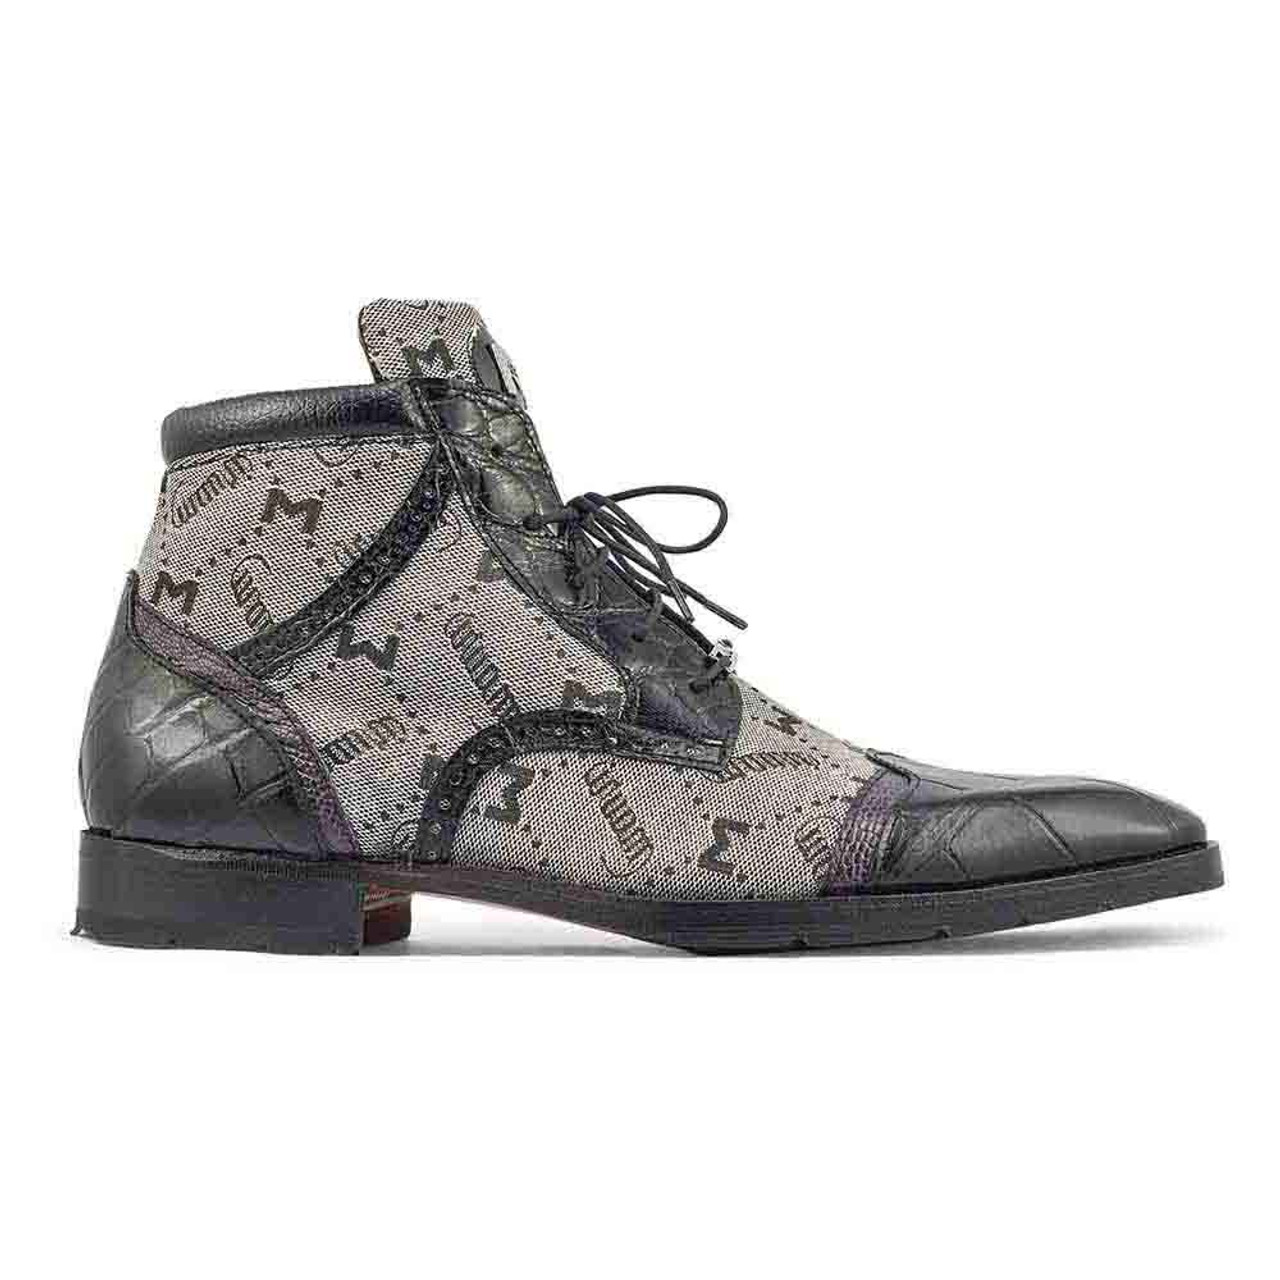 Shoe of the Day: Louis Vuitton LV Suite Flat Mule - Exotic Excess